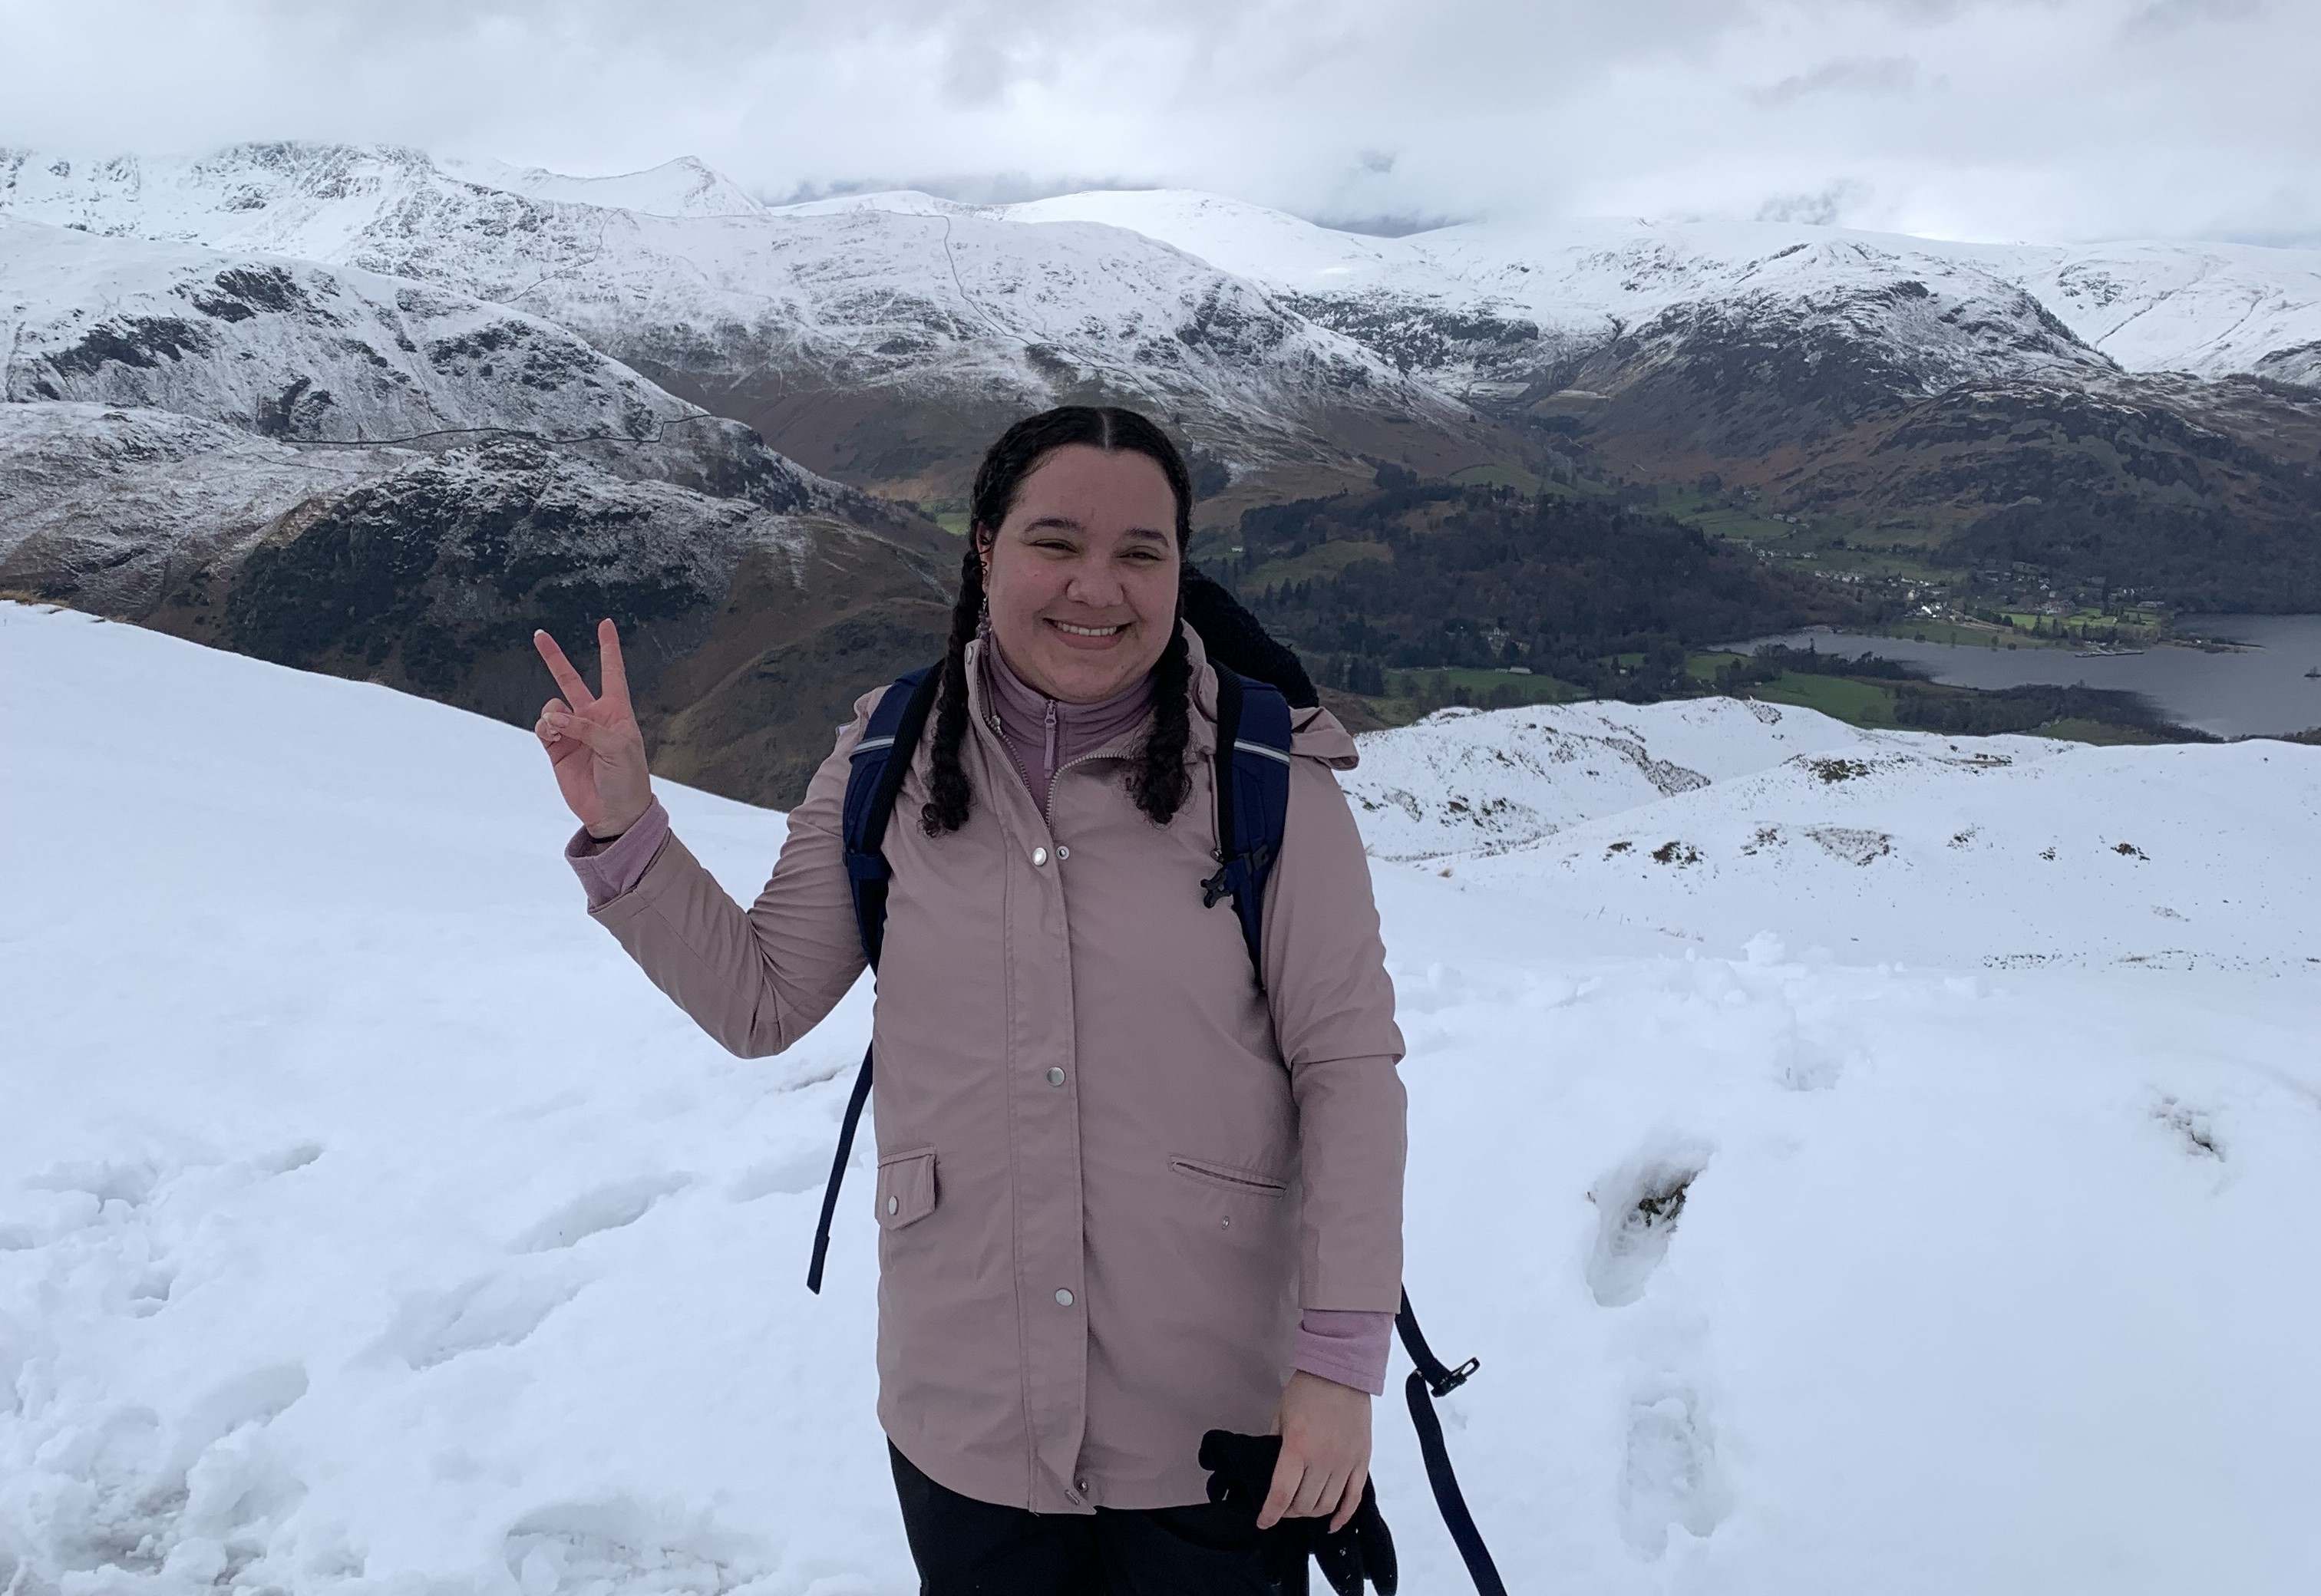 Student Lyea standing on a snowy hill with snowy mountains in the distance.